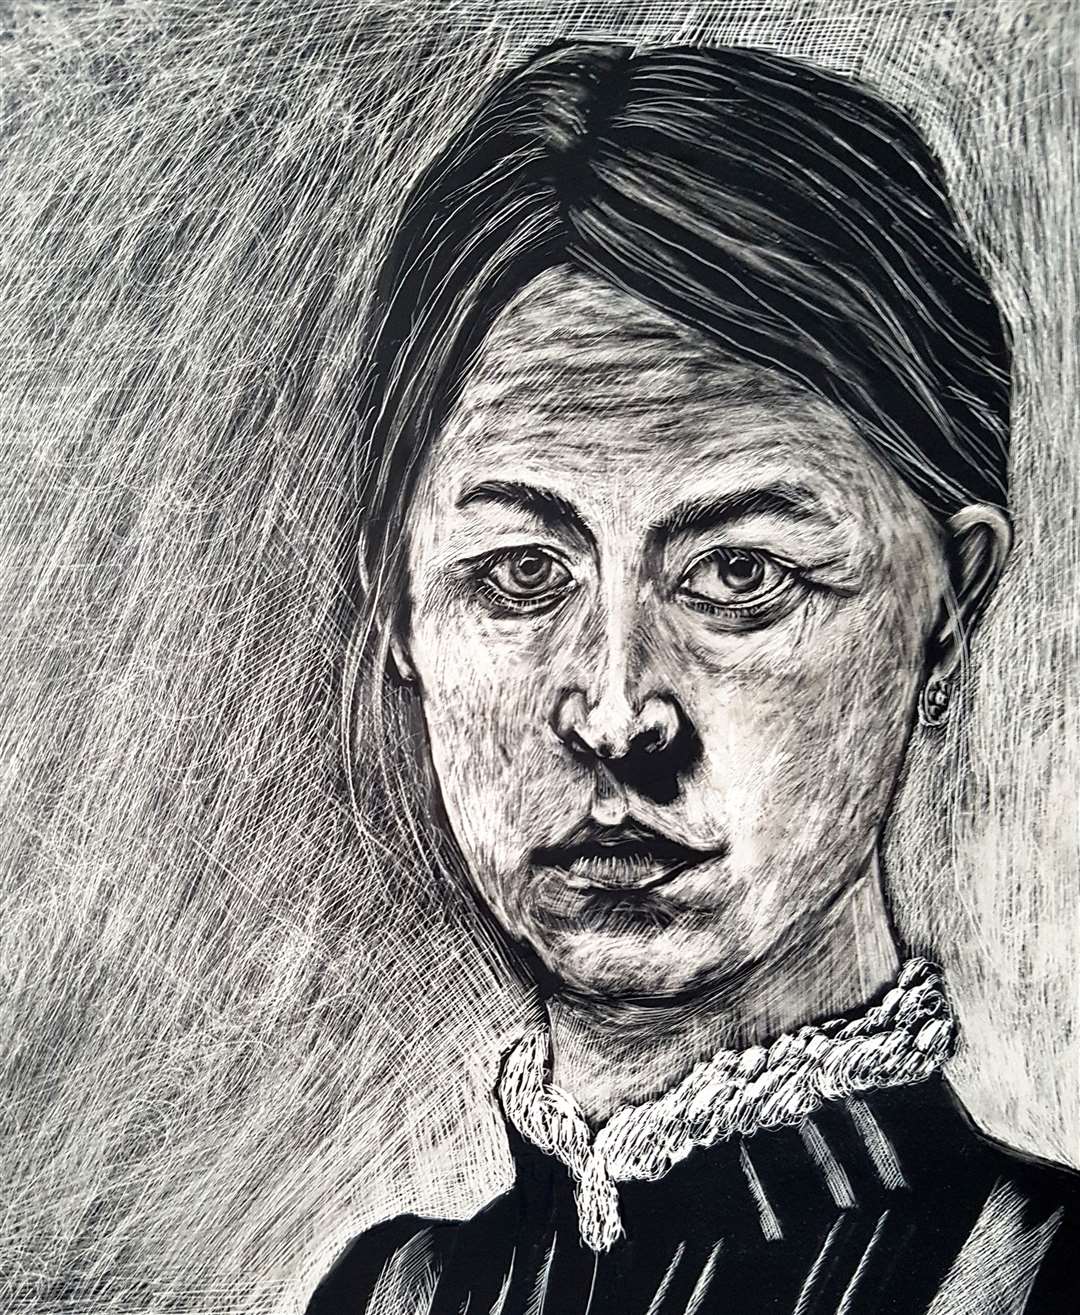 Lindsey's scratchboard self-portrait got her a place on the acclaimed TV show and was highly commended by the show's presenters and judging panel.